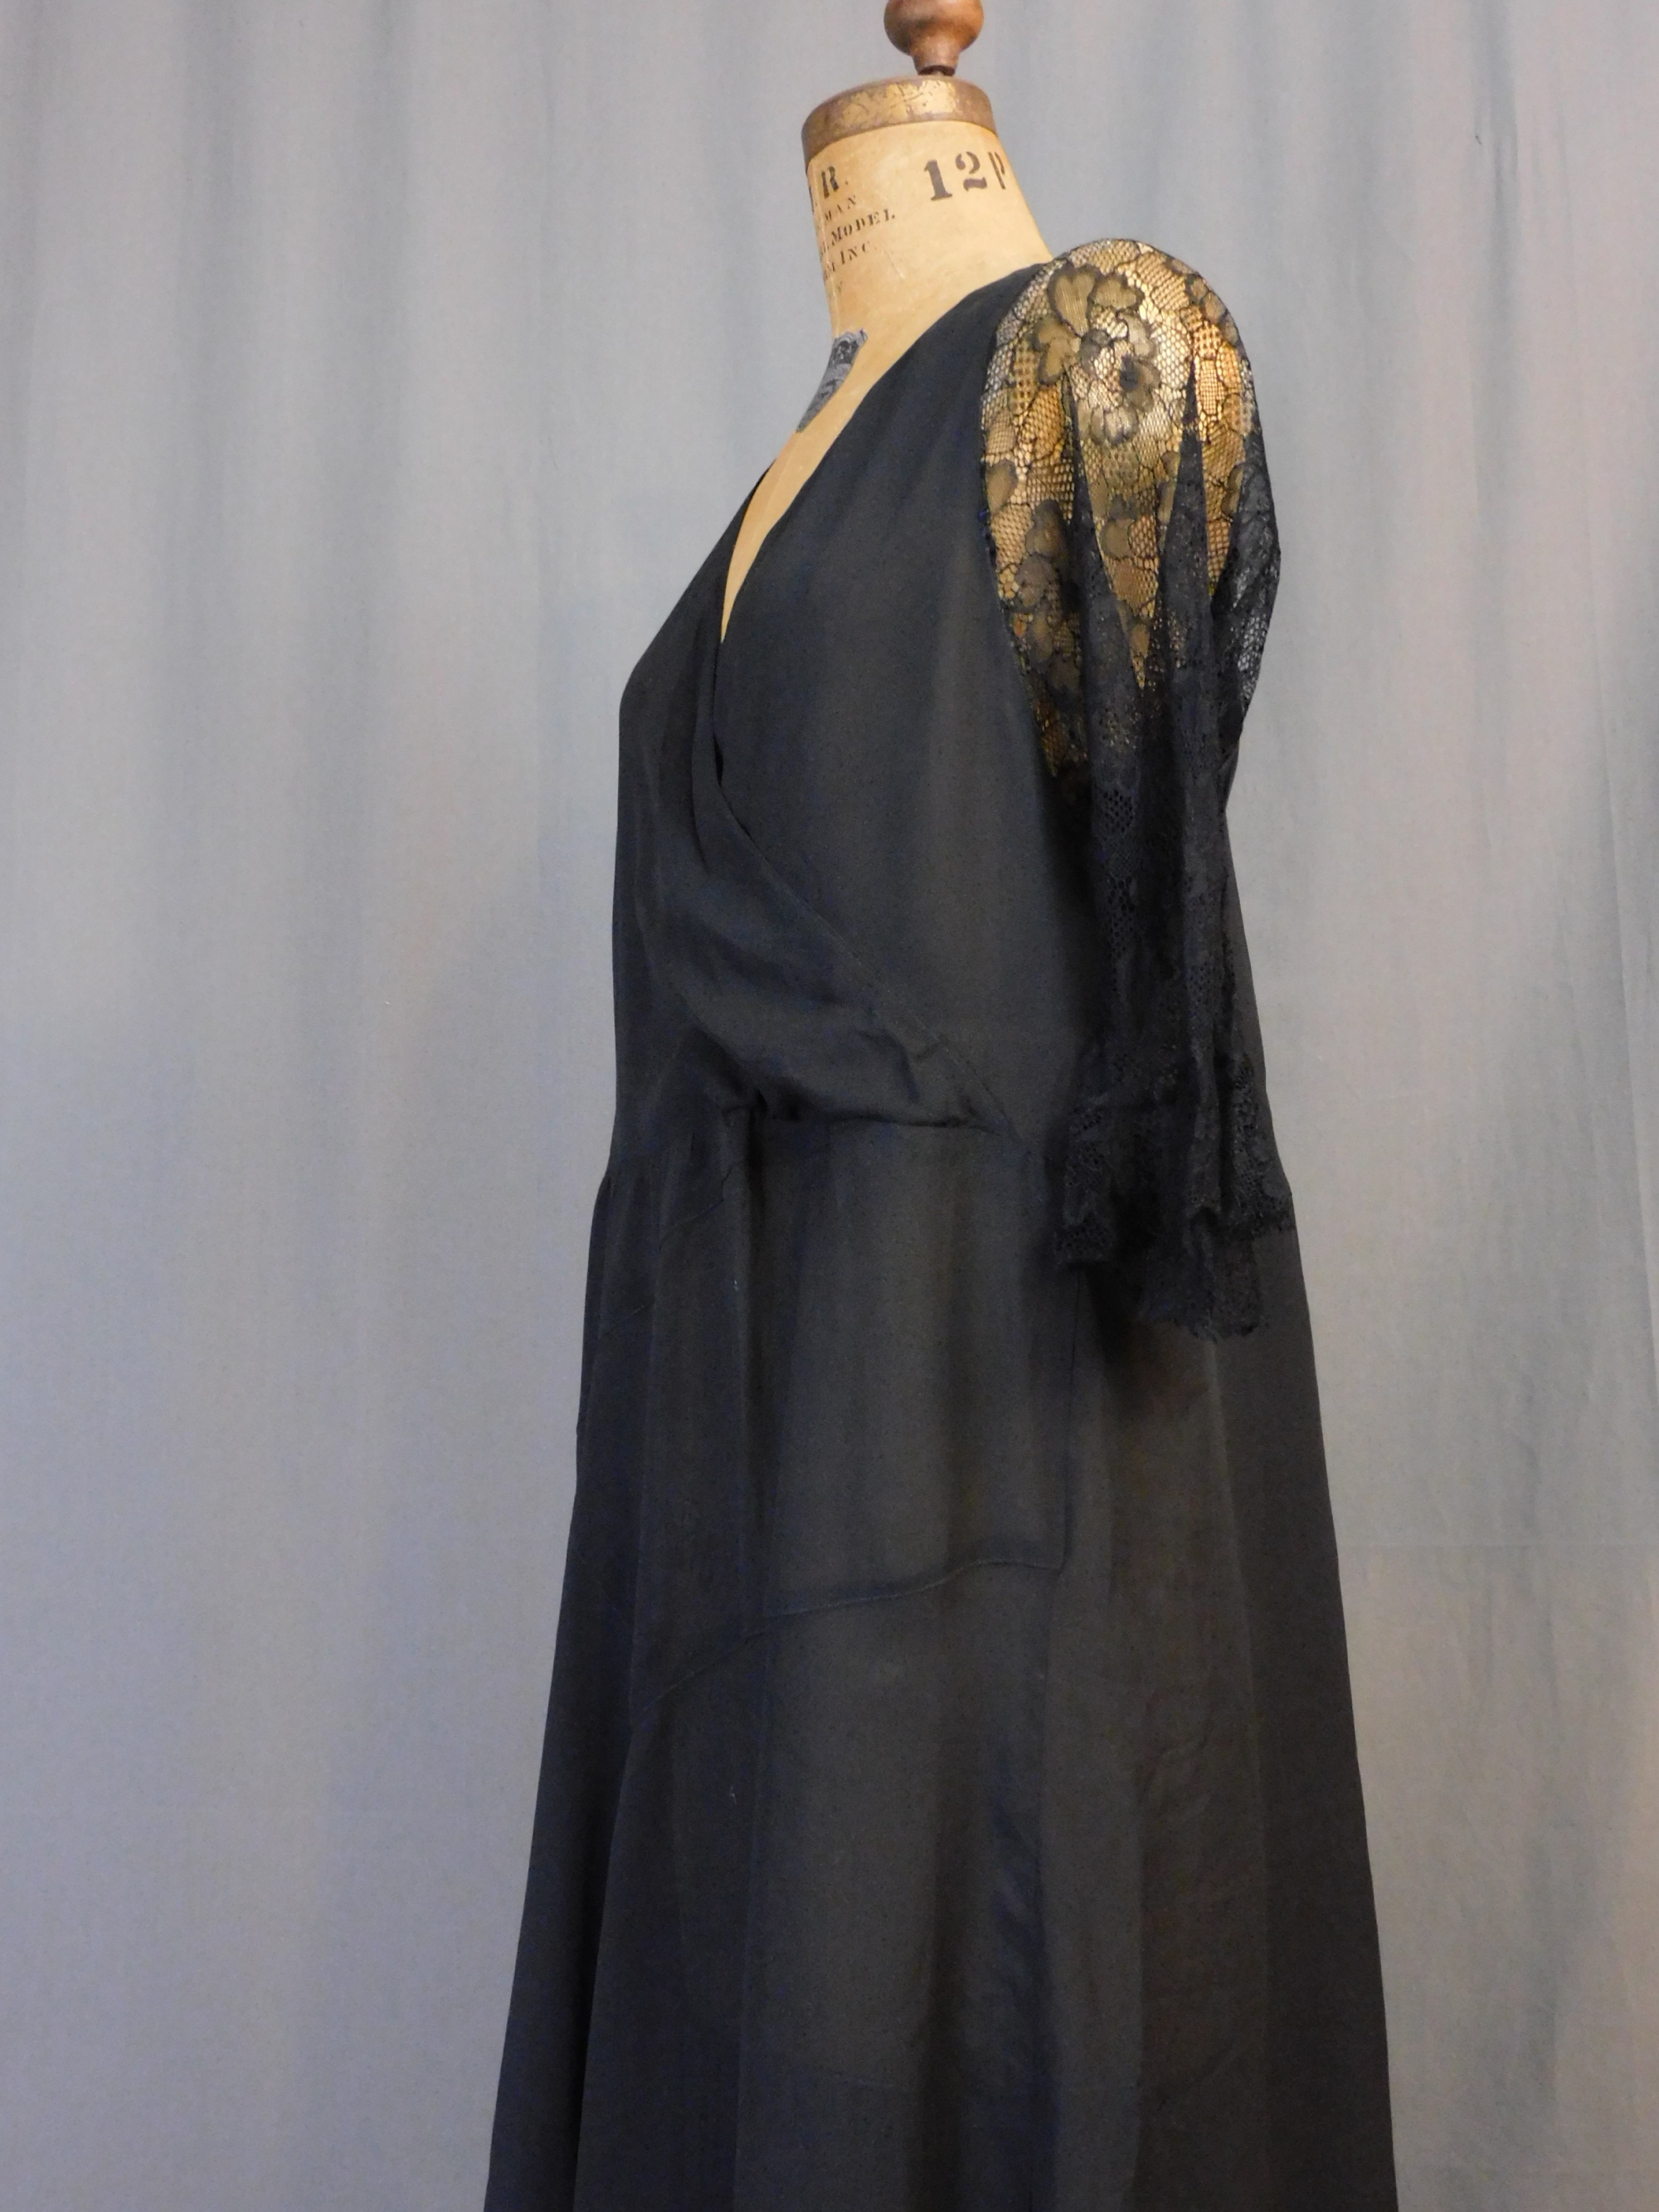 Vintage 1920s Crepe & Lace Gown Black Evening Dress, fits 36 inch bust,  with issues